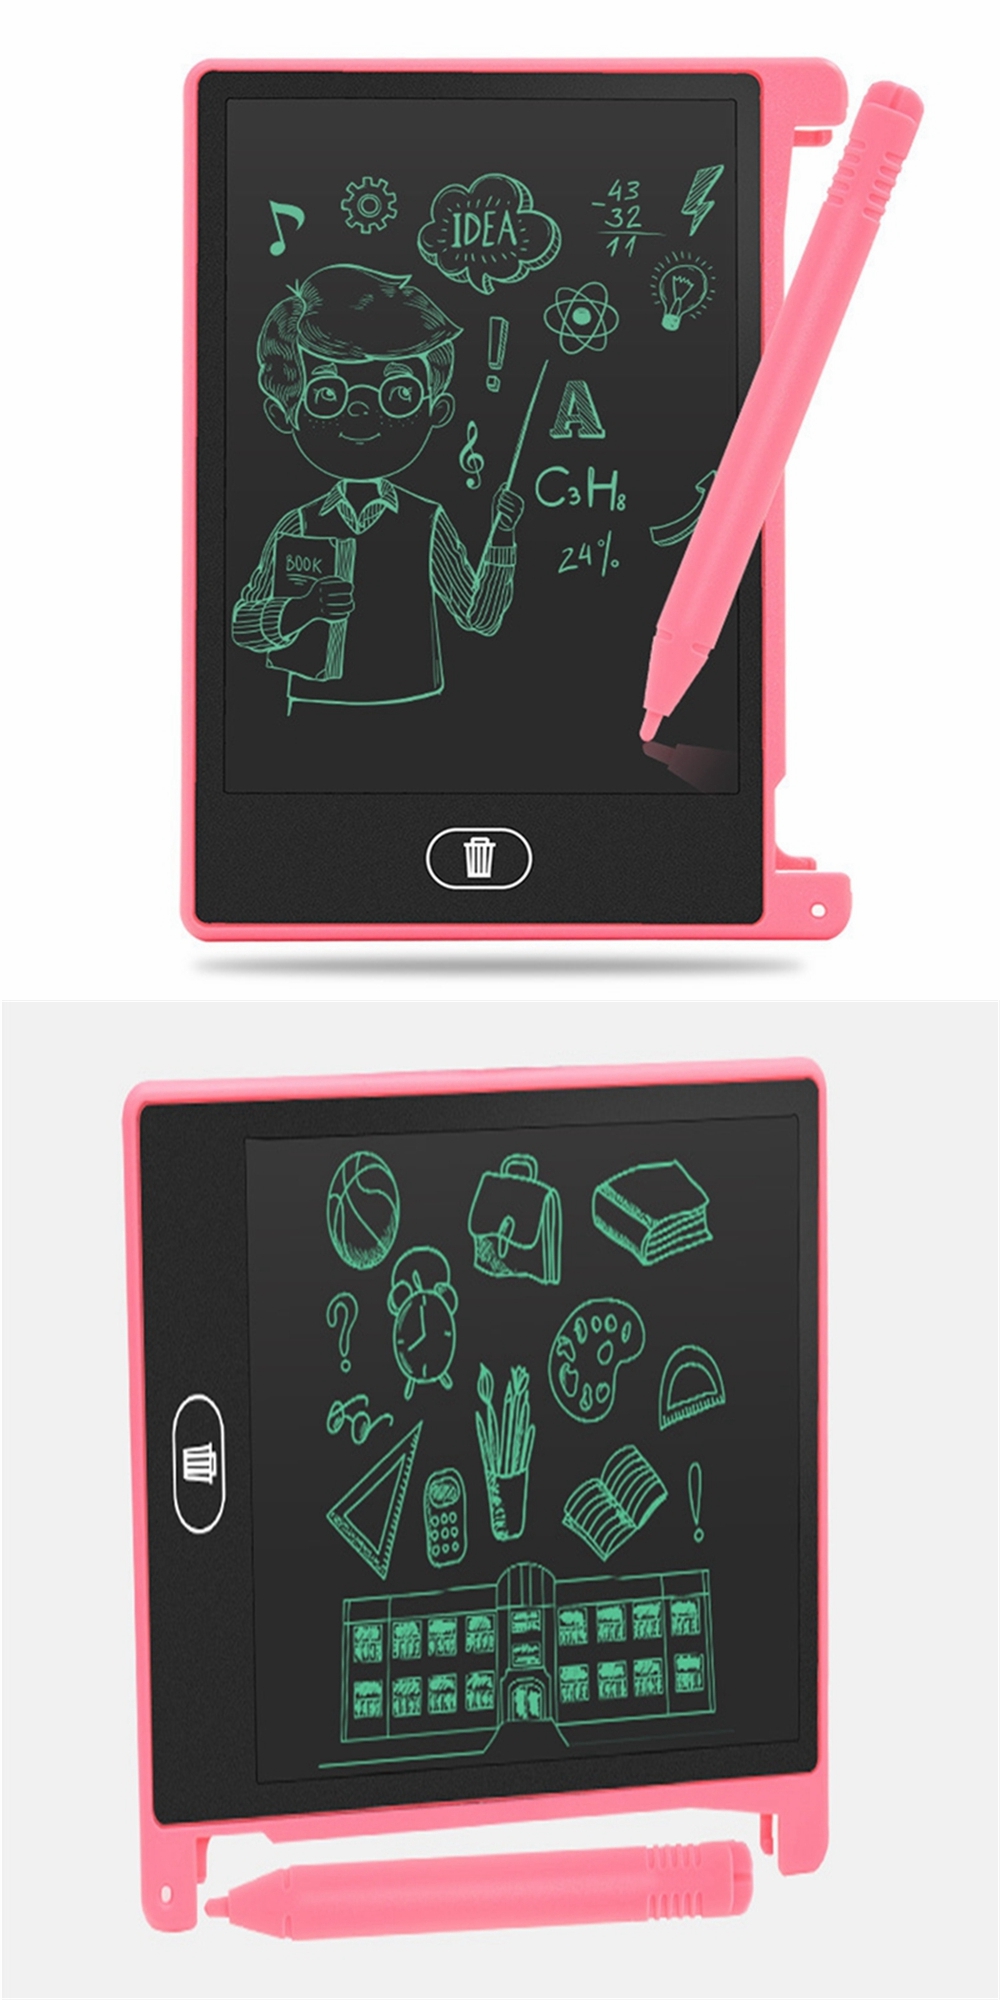 AS1044A-Ultra-Thin-Portable-44-Inch-LCD-Writing-Tablet-Digital-Drawing-Handwriting-Pads-With-Pen-1341256-9